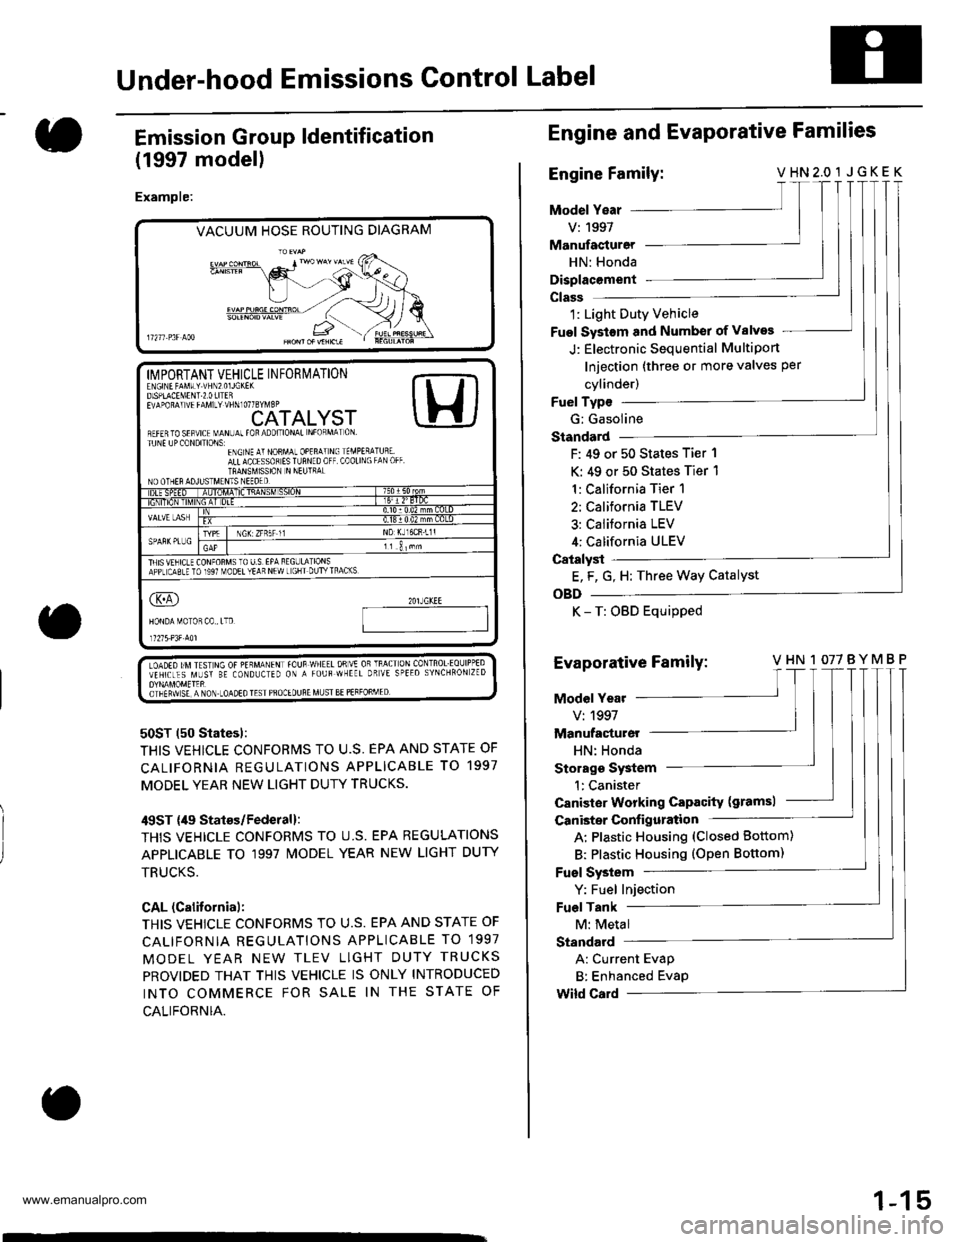 HONDA CR-V 1997 RD1-RD3 / 1.G Workshop Manual 
Under-hood Emissions Control Label
Emission Group ldentification
(1997 modell
Example:
VACUUM HOSE ROUTING DIAGRAM
LOADED IM TEST]NG OF PERMANENT fOUB WHEEL OSVE OR TRACT ON CONTROLEOLJIPPEDVEHTCLES